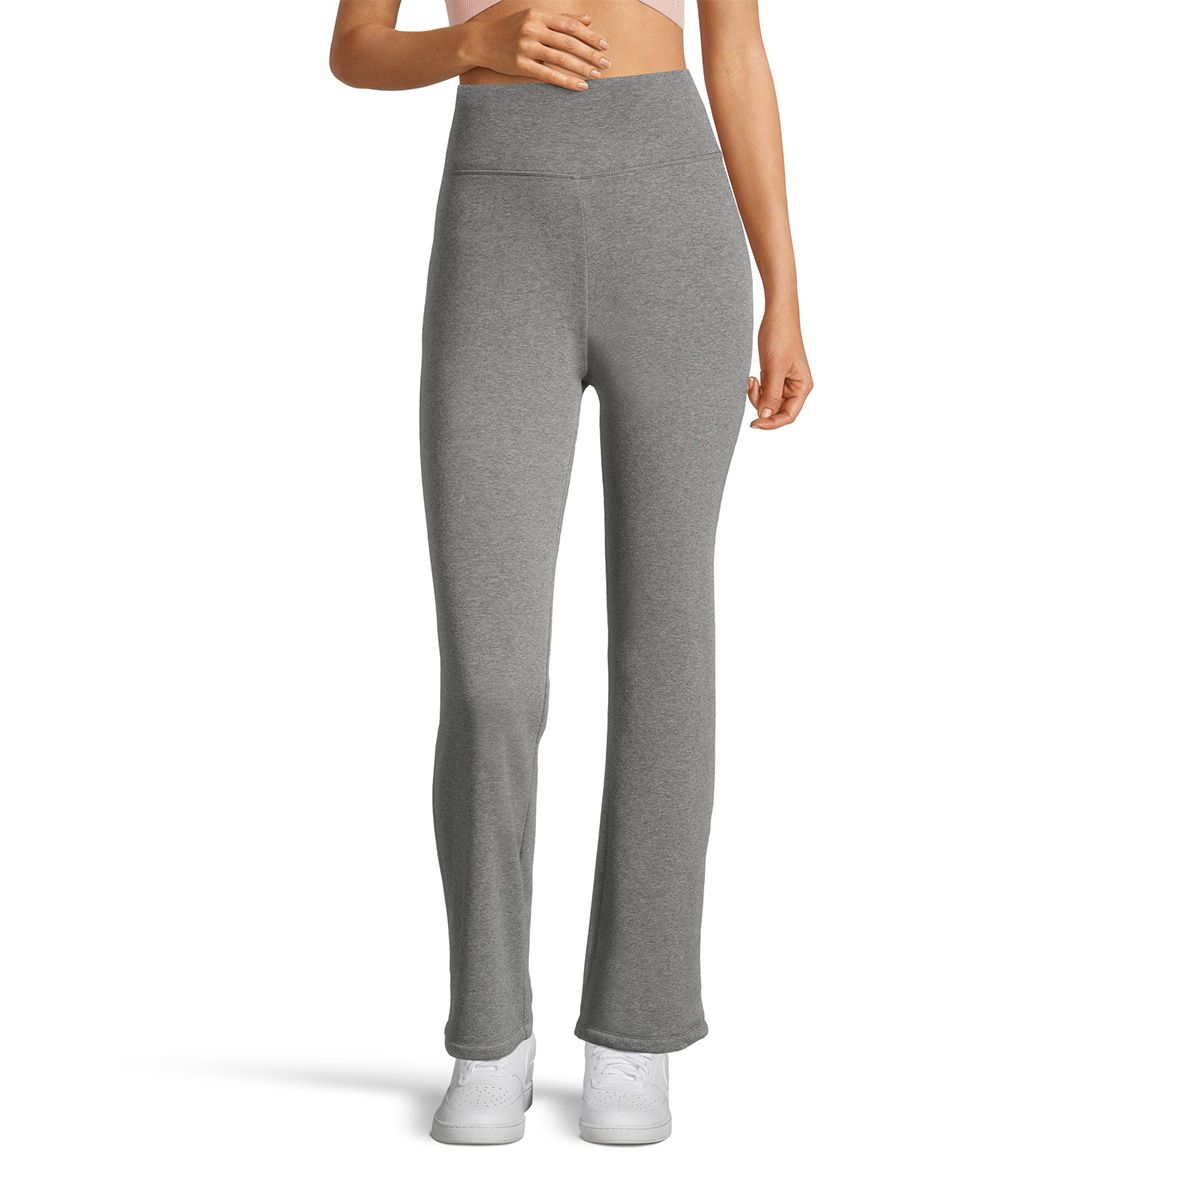 Everyday Sunday Women's The Warm Fleece Lined Pants, Lounge, High Rise